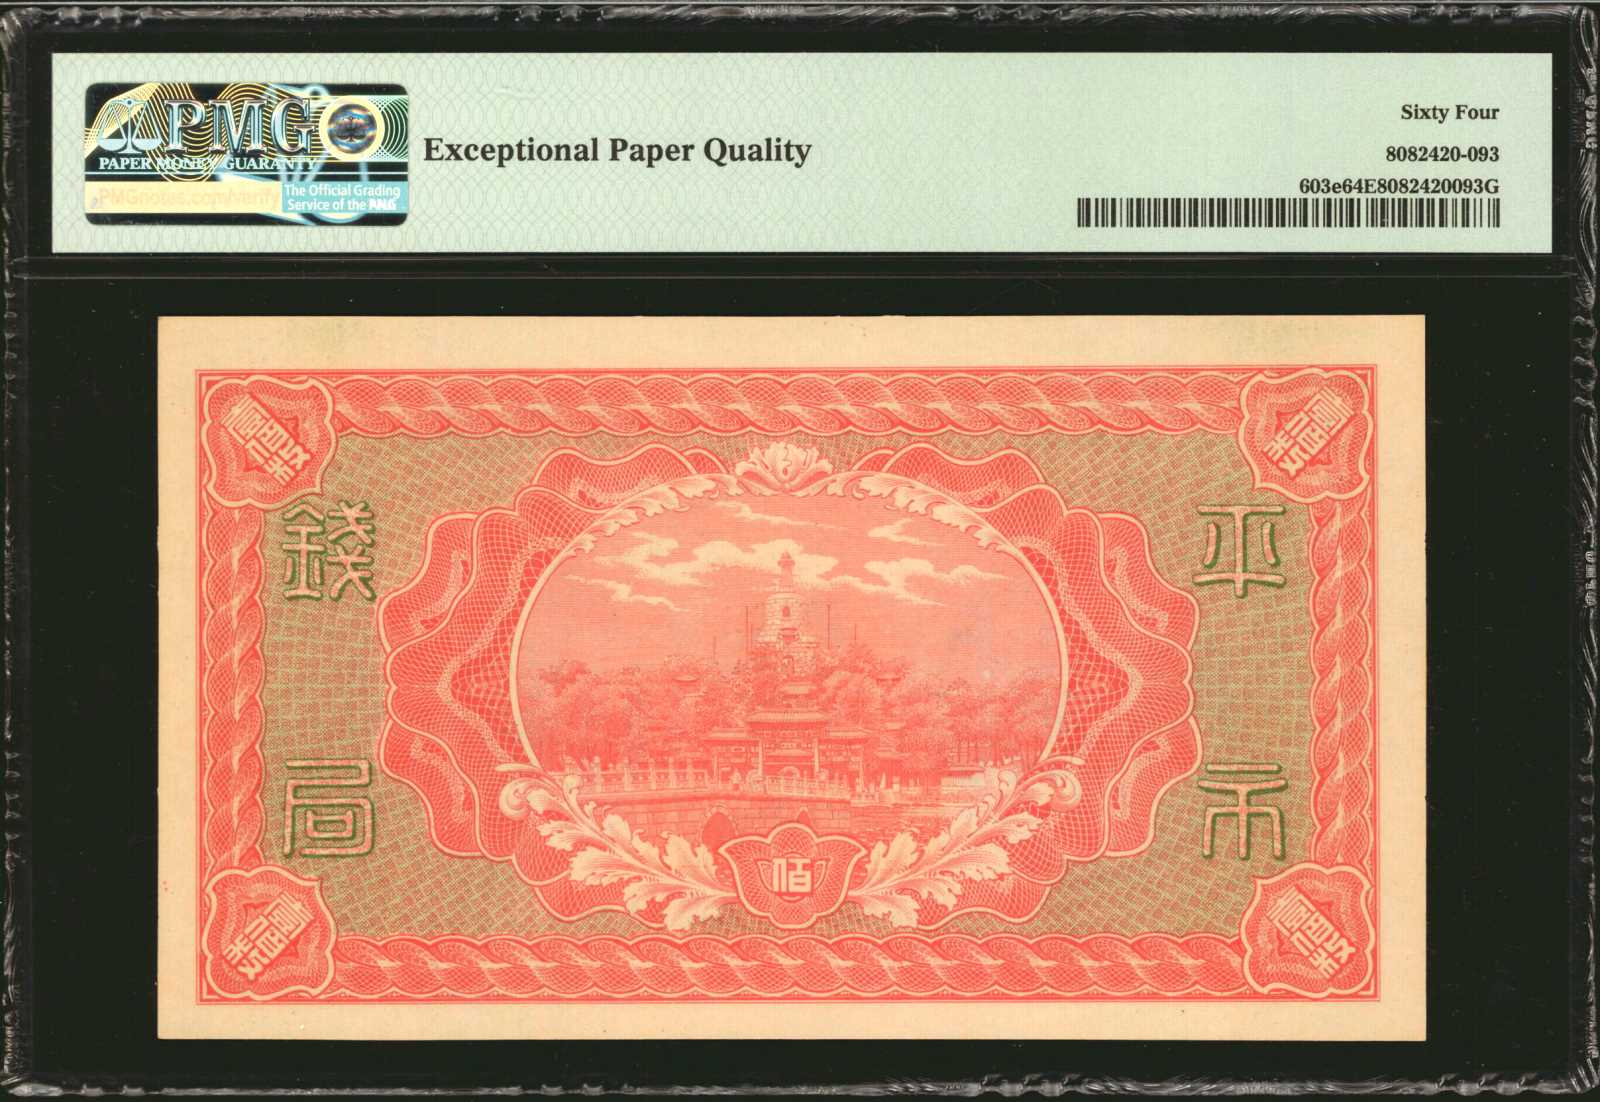 China Military Banks Bank of Sichuan Currency & Banknote Values 